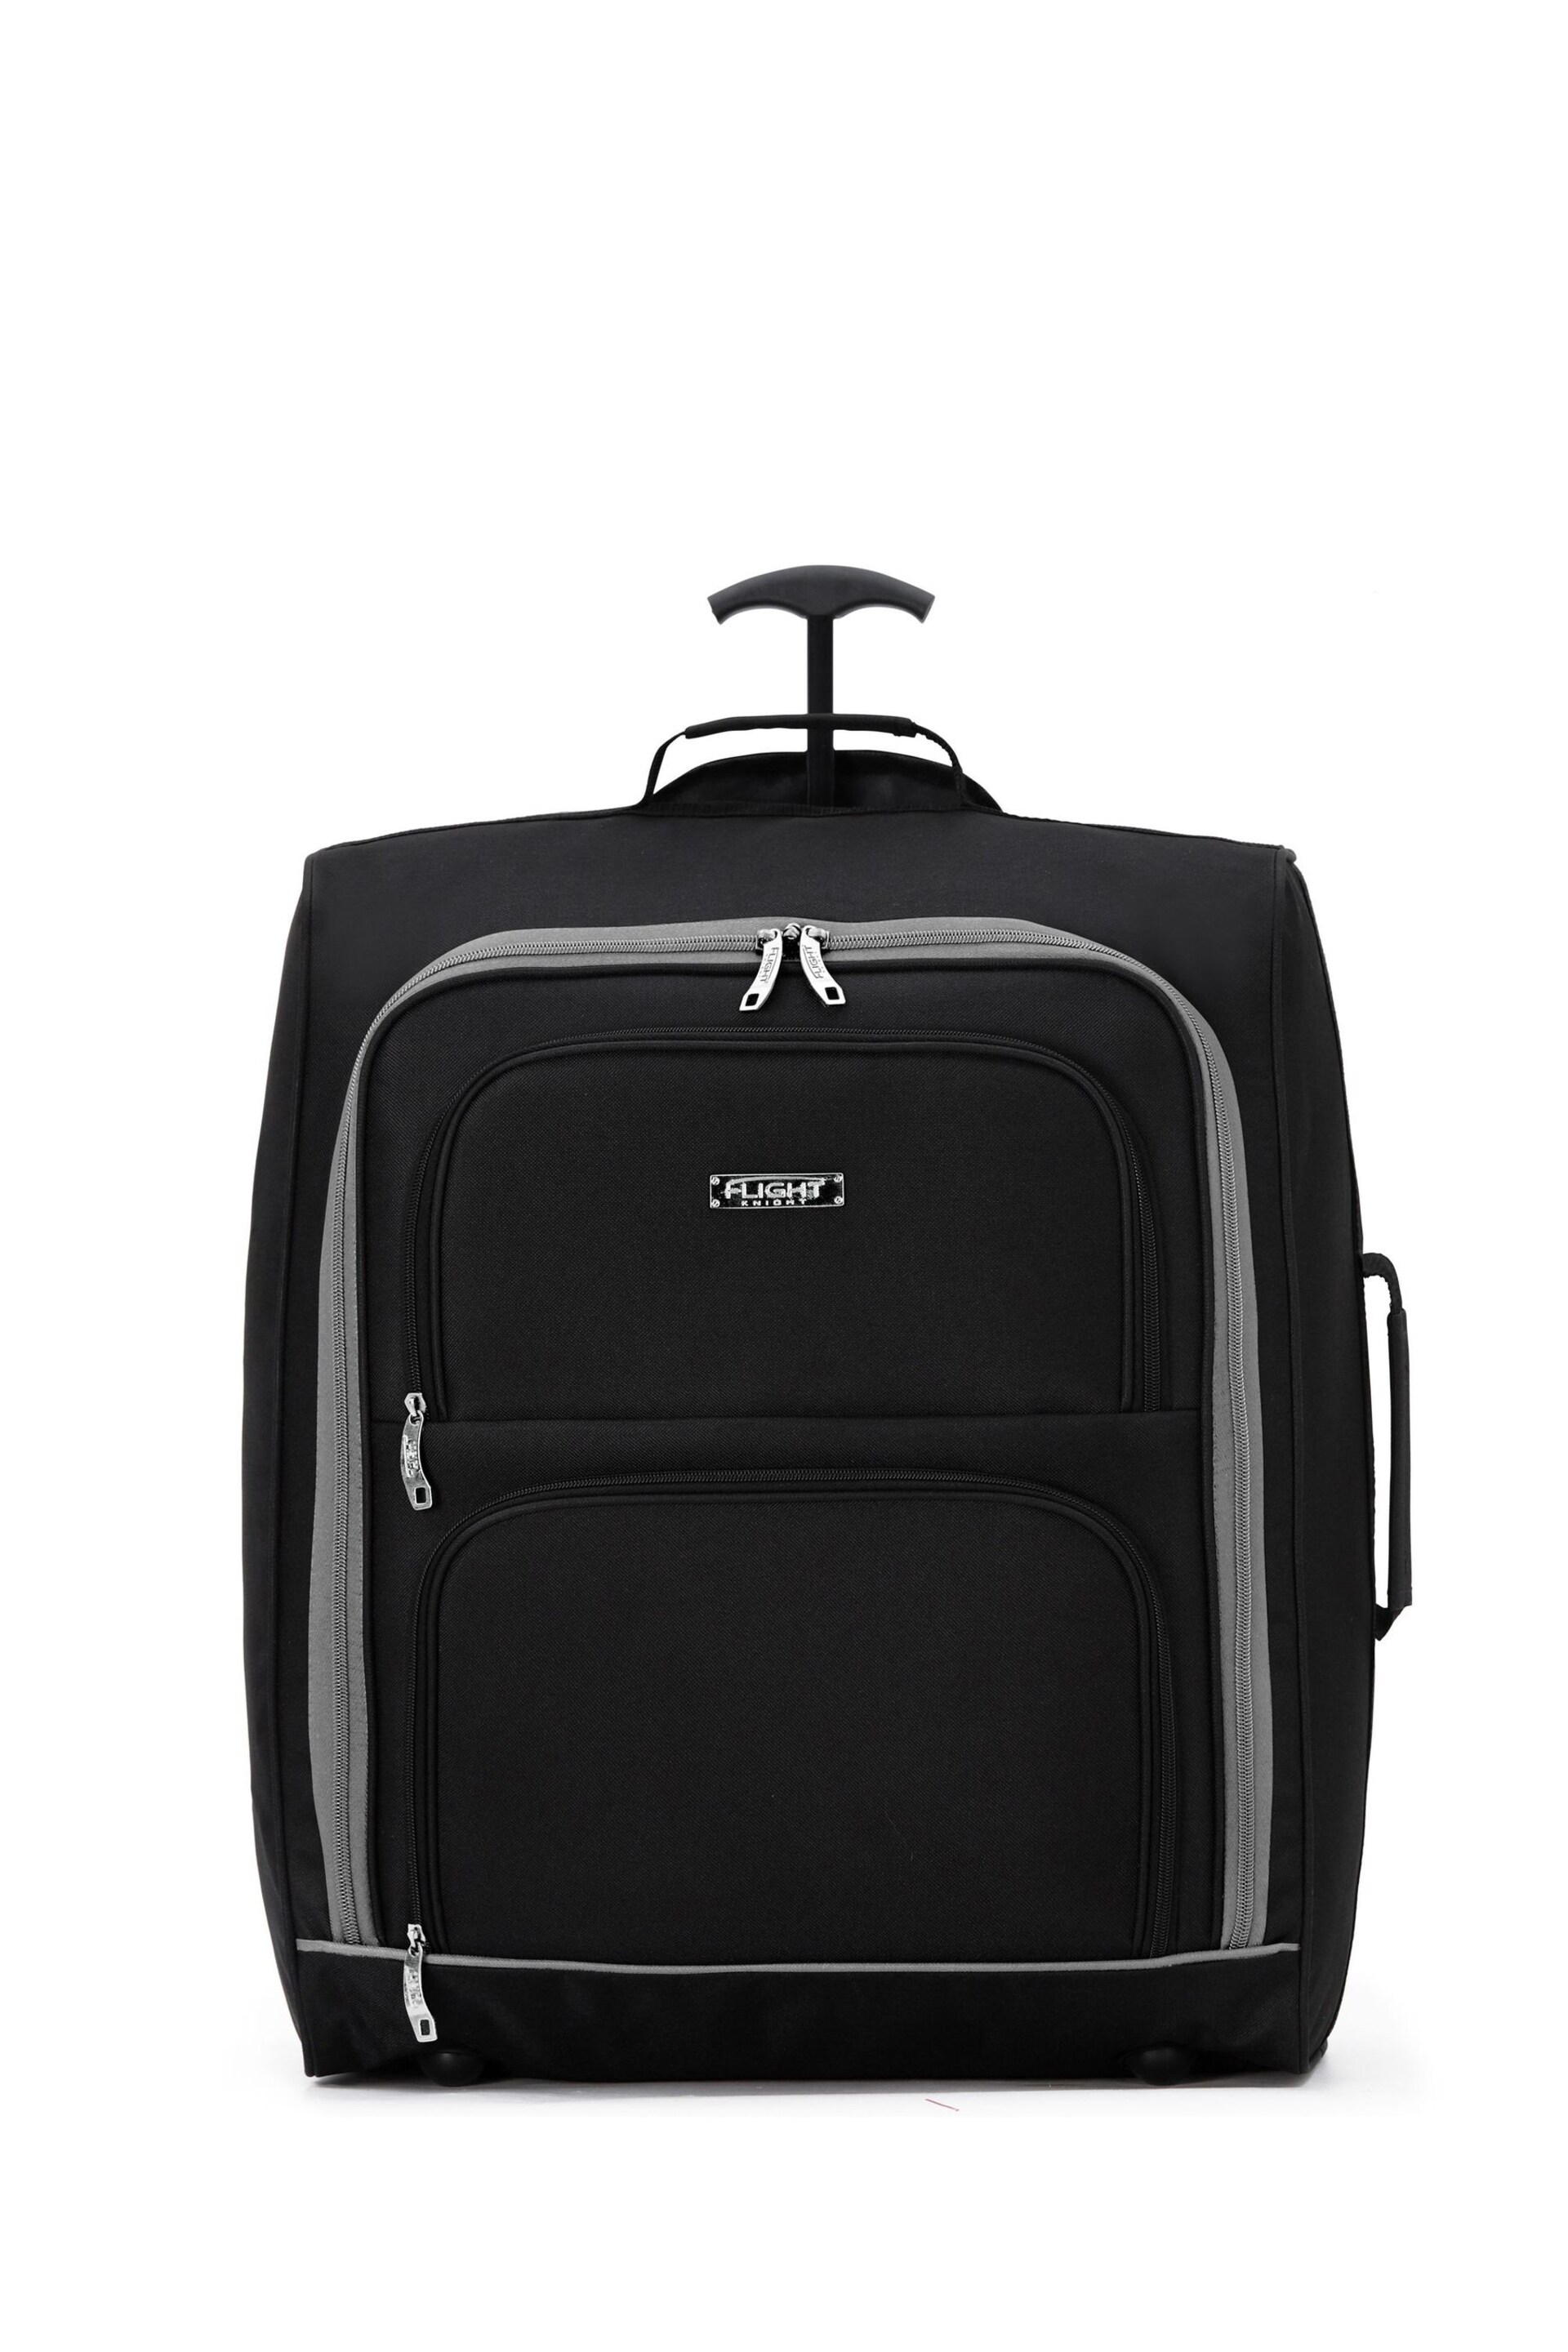 Flight Knight Soft Cabin Carry-on Bag BA Compatible 2 Wheels - Image 1 of 1